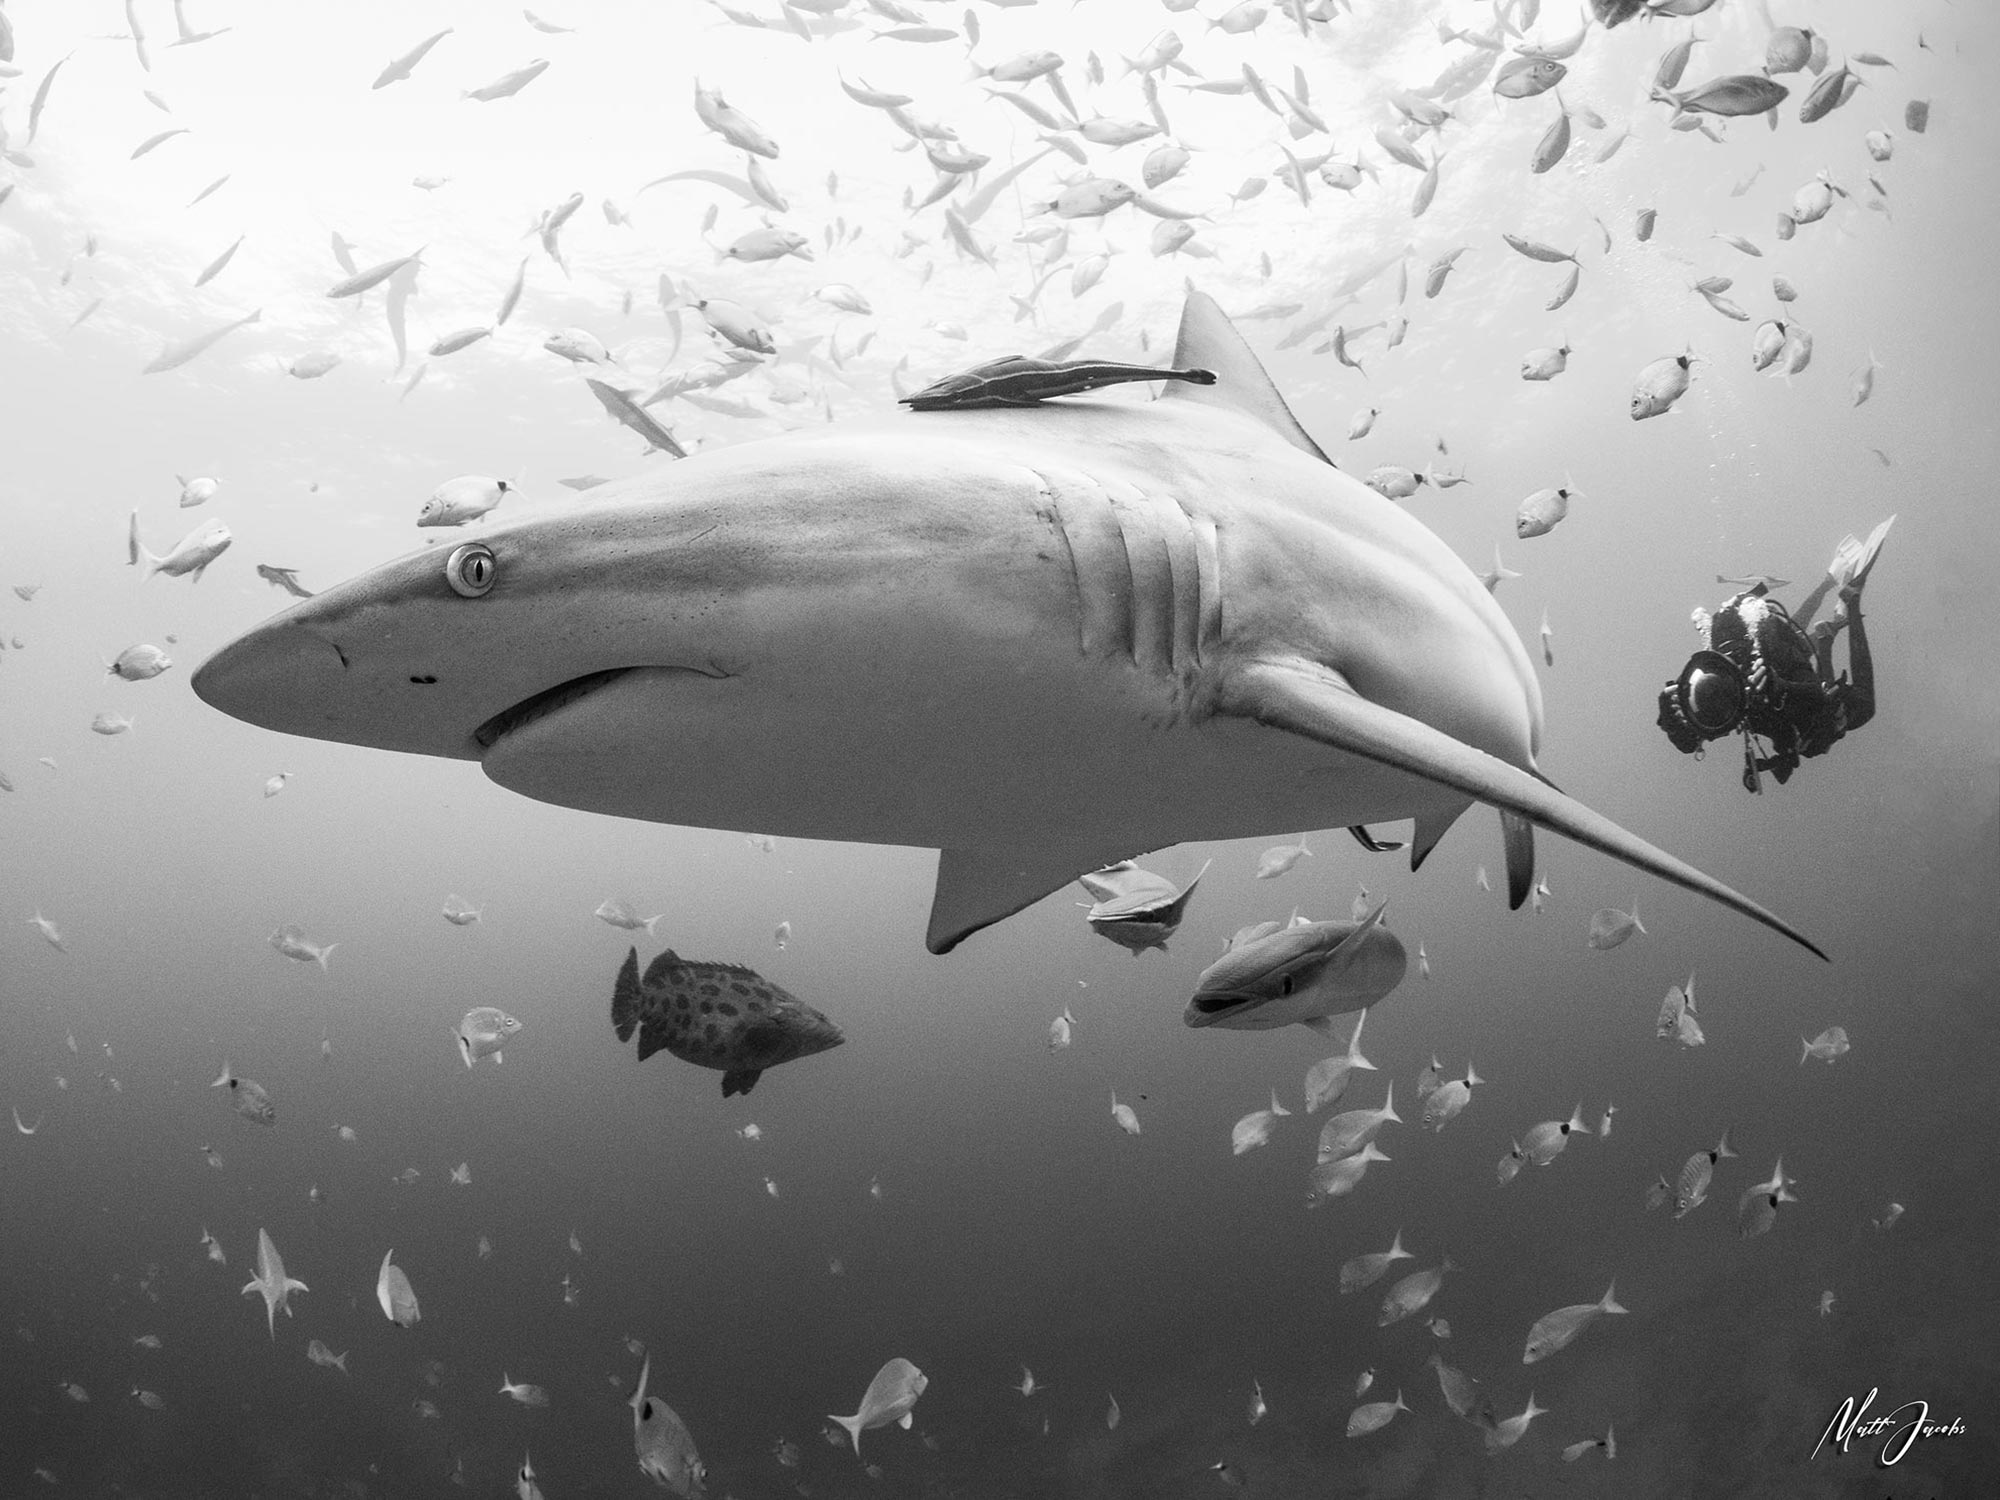 The Greatest Classroom on Earth: Teaching Underwater Photography in South Africa